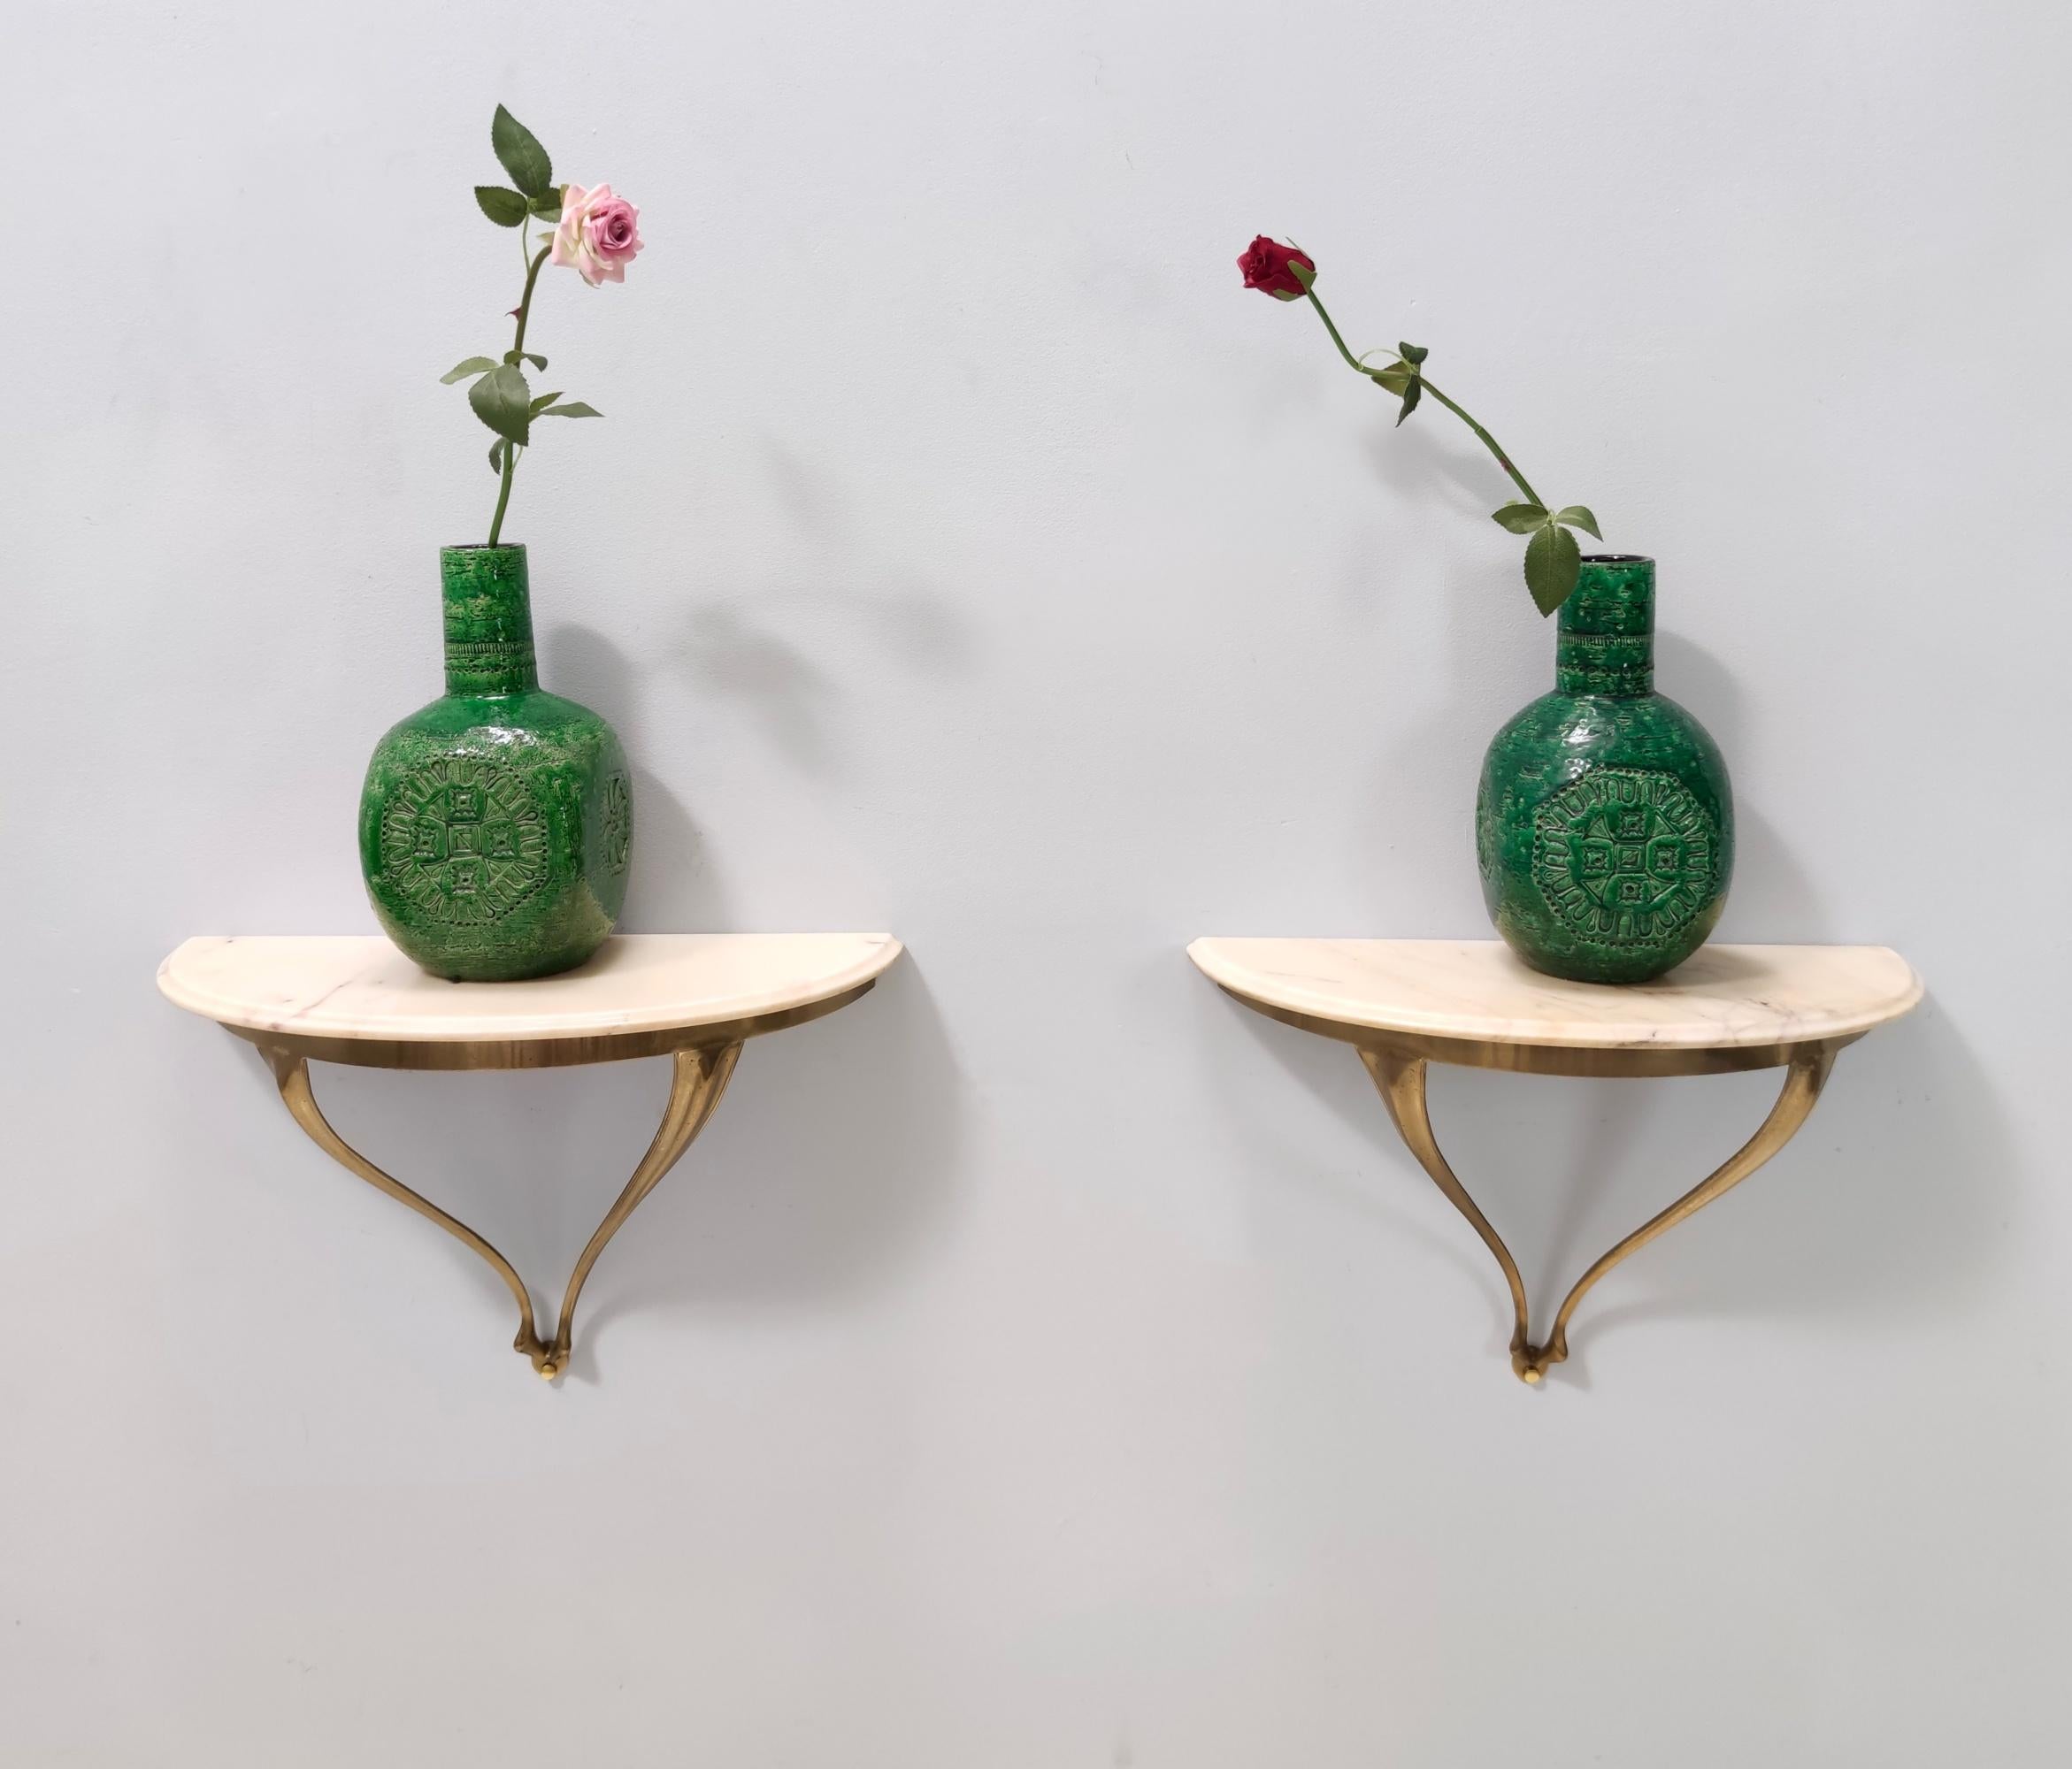 Made in Italy, 1970s.
It was designed by Aldo Londi and produced for Bitossi.
Bitossi was founded in 1921 in Montelupo, a city near Florence, and it is one of the most known Italian ceramic company.
These wonderful handmade vases are in ceramic,